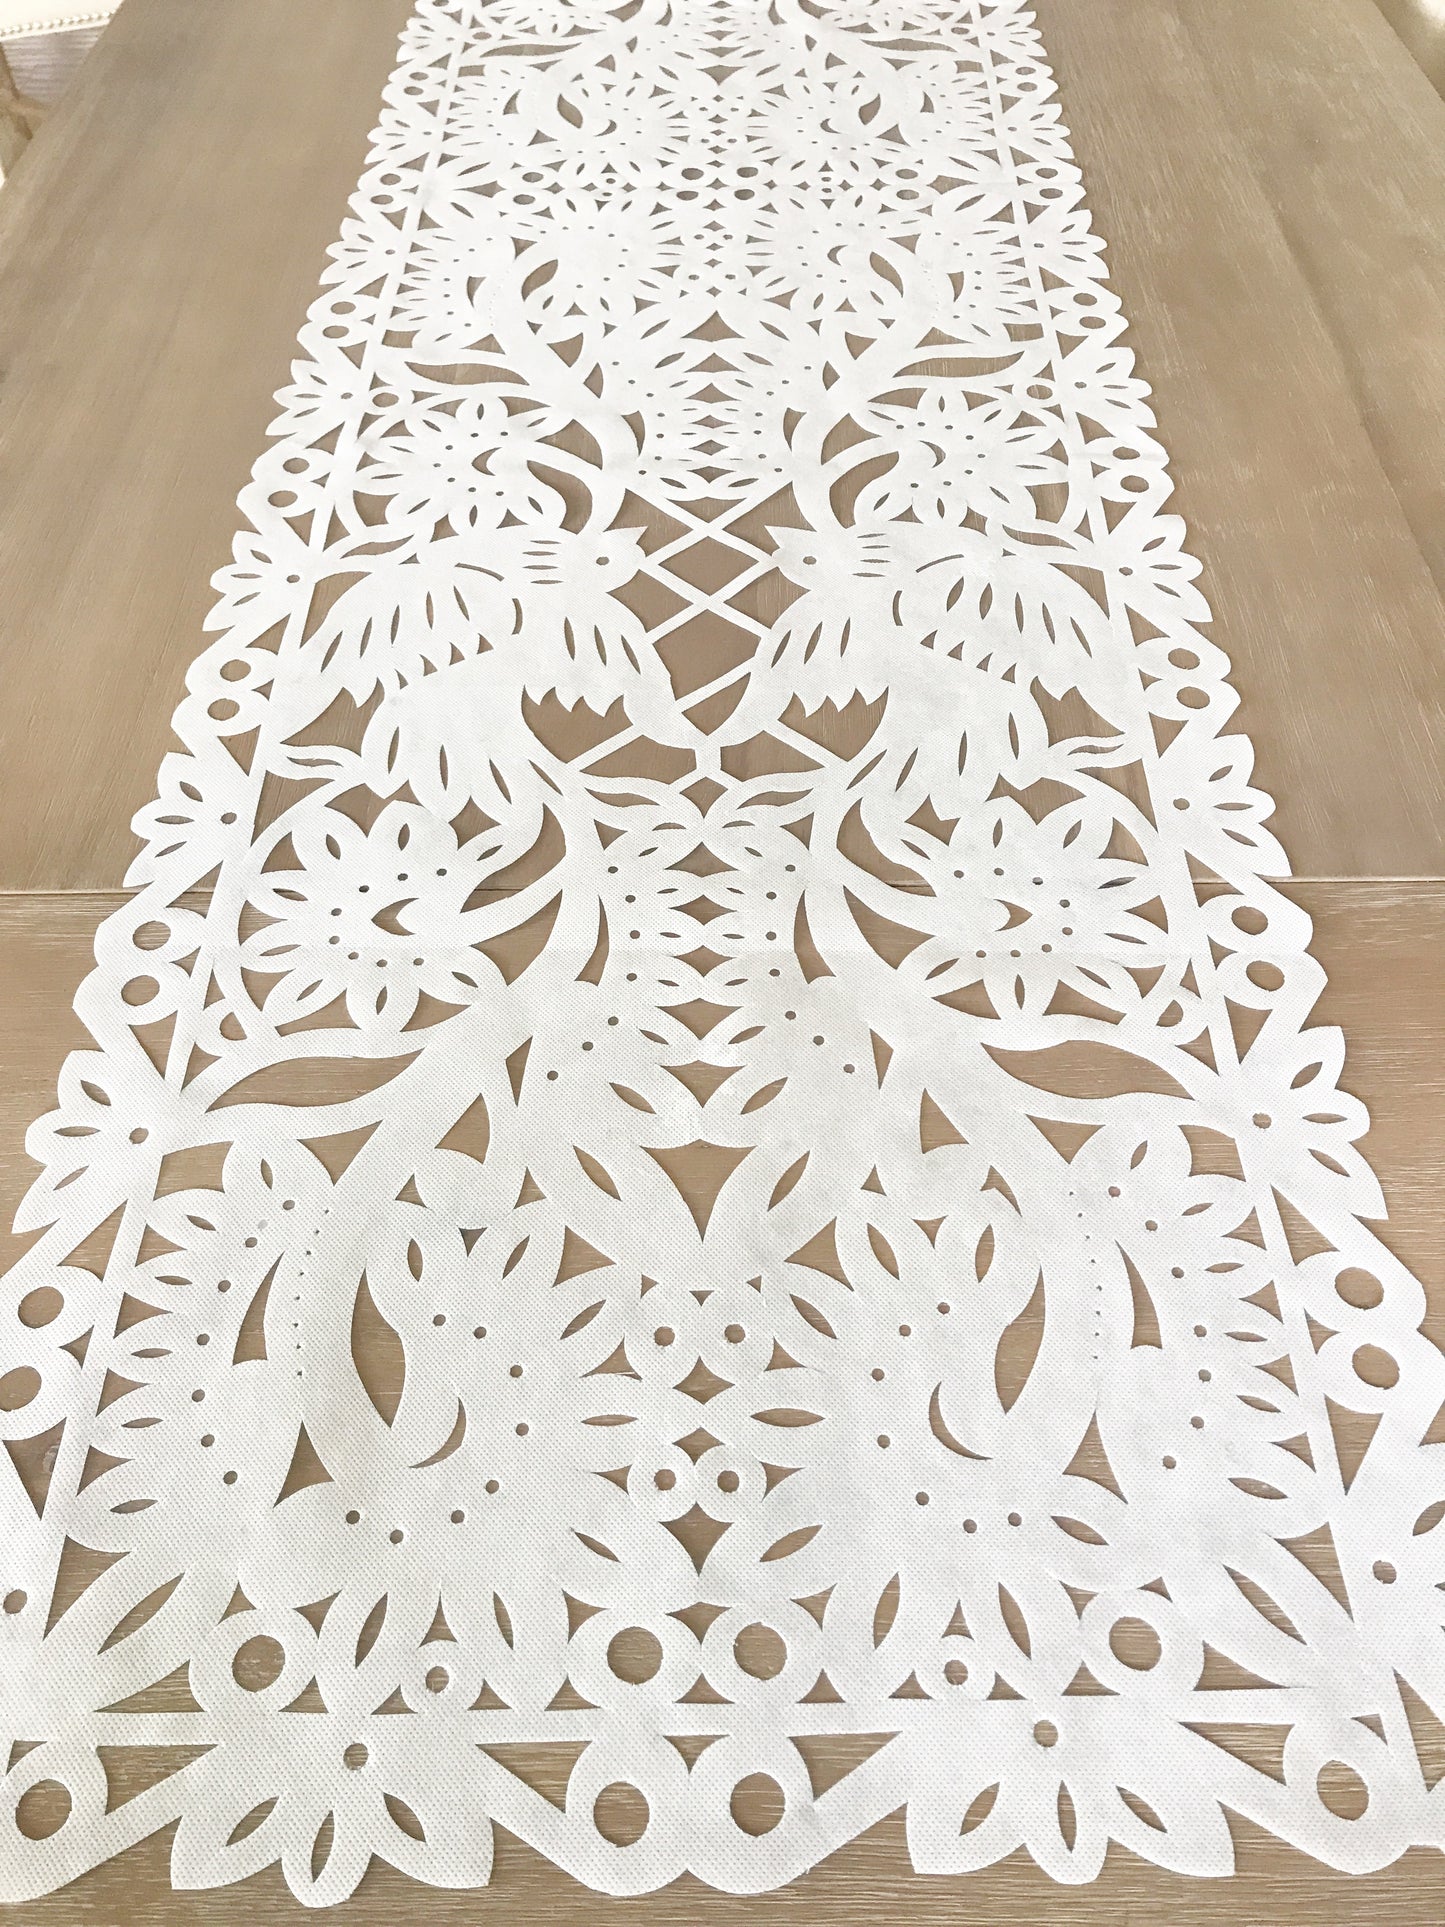 Mexican Papel picado Table Runner in White synthetic Fabric